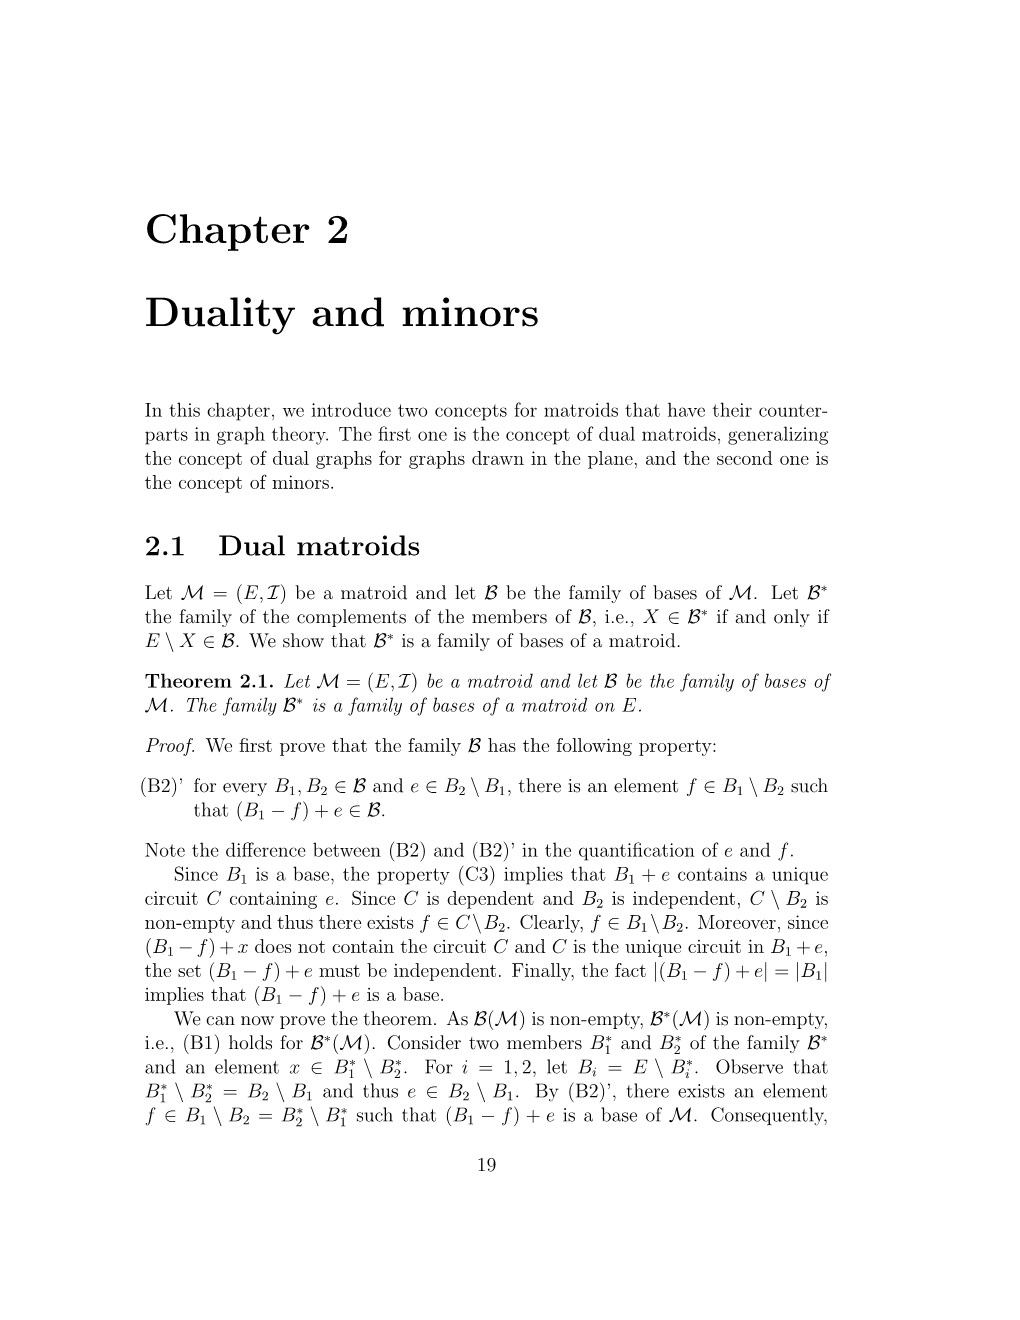 Chapter 2 Duality and Minors